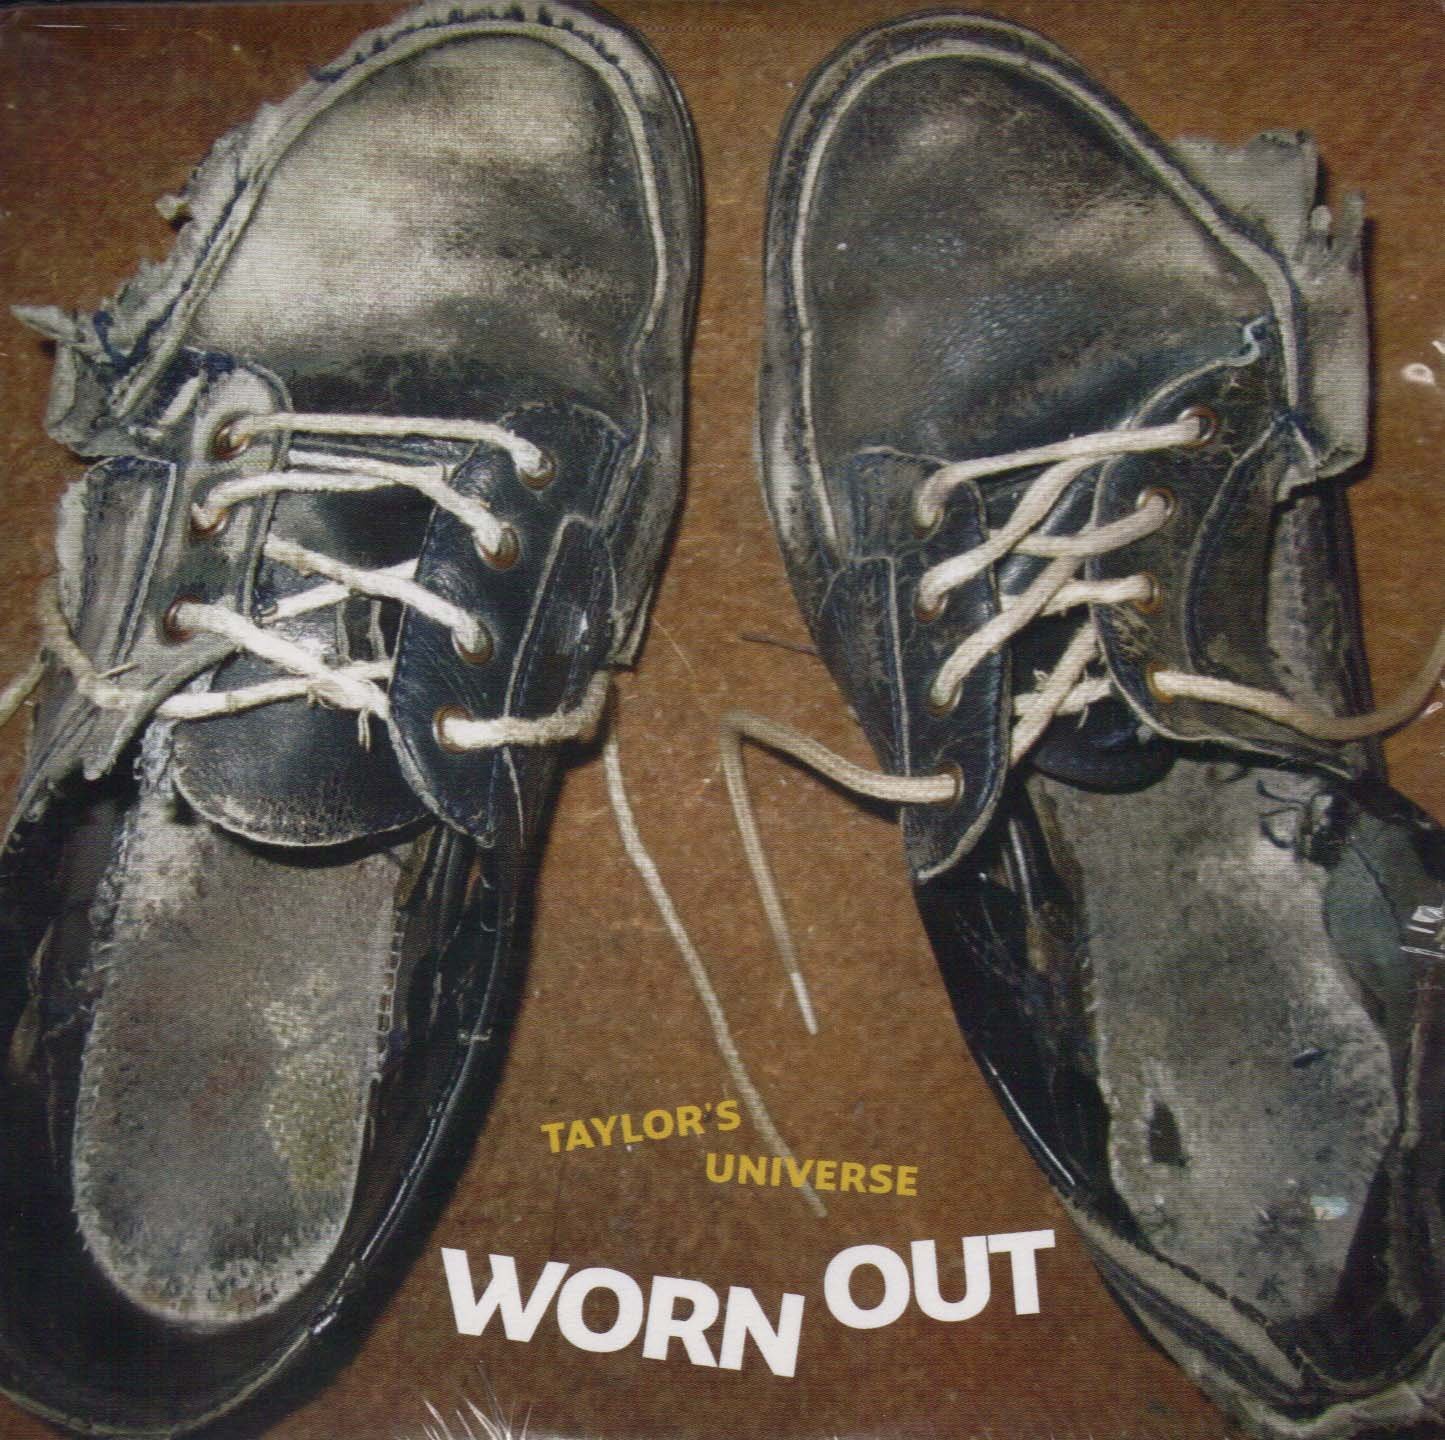 Taylor's Universe - Worn Out